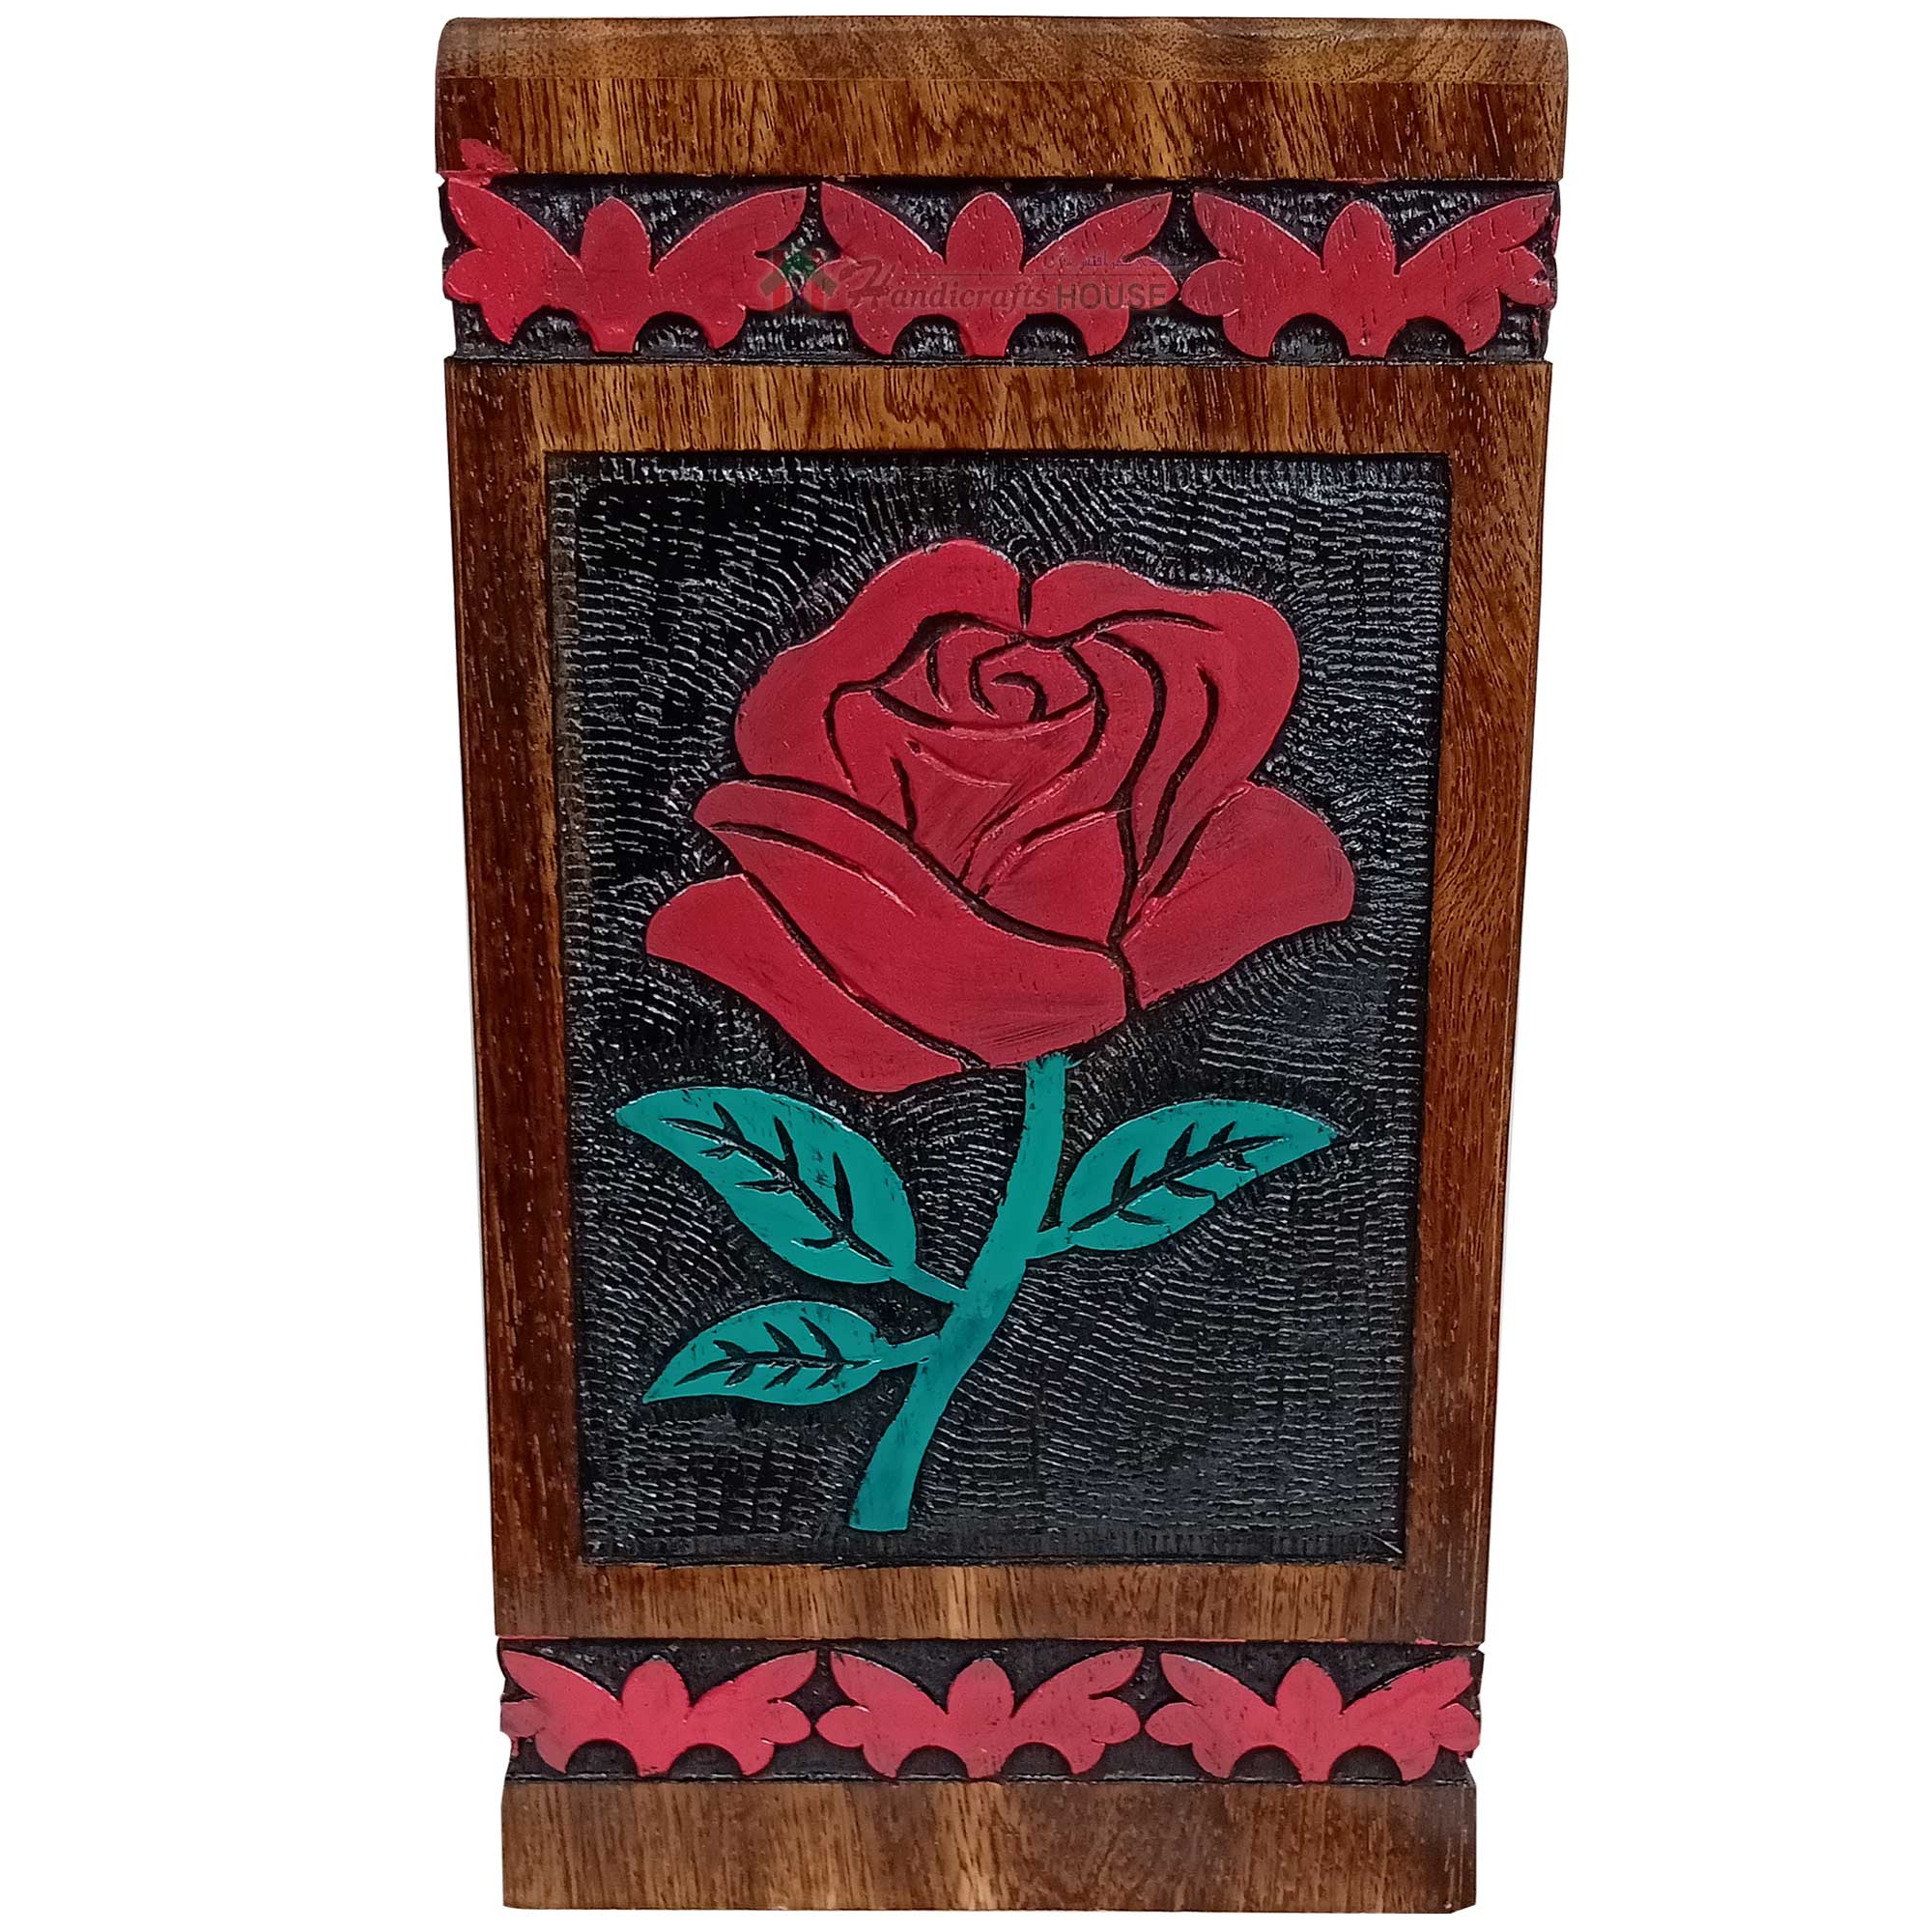 Hands Carving Flower Wooden Cremation Urns, Solid Wood Burial Box for Human or Pet Ashes Adult - Hardwood Memorial Large Urn for Loved One and Father